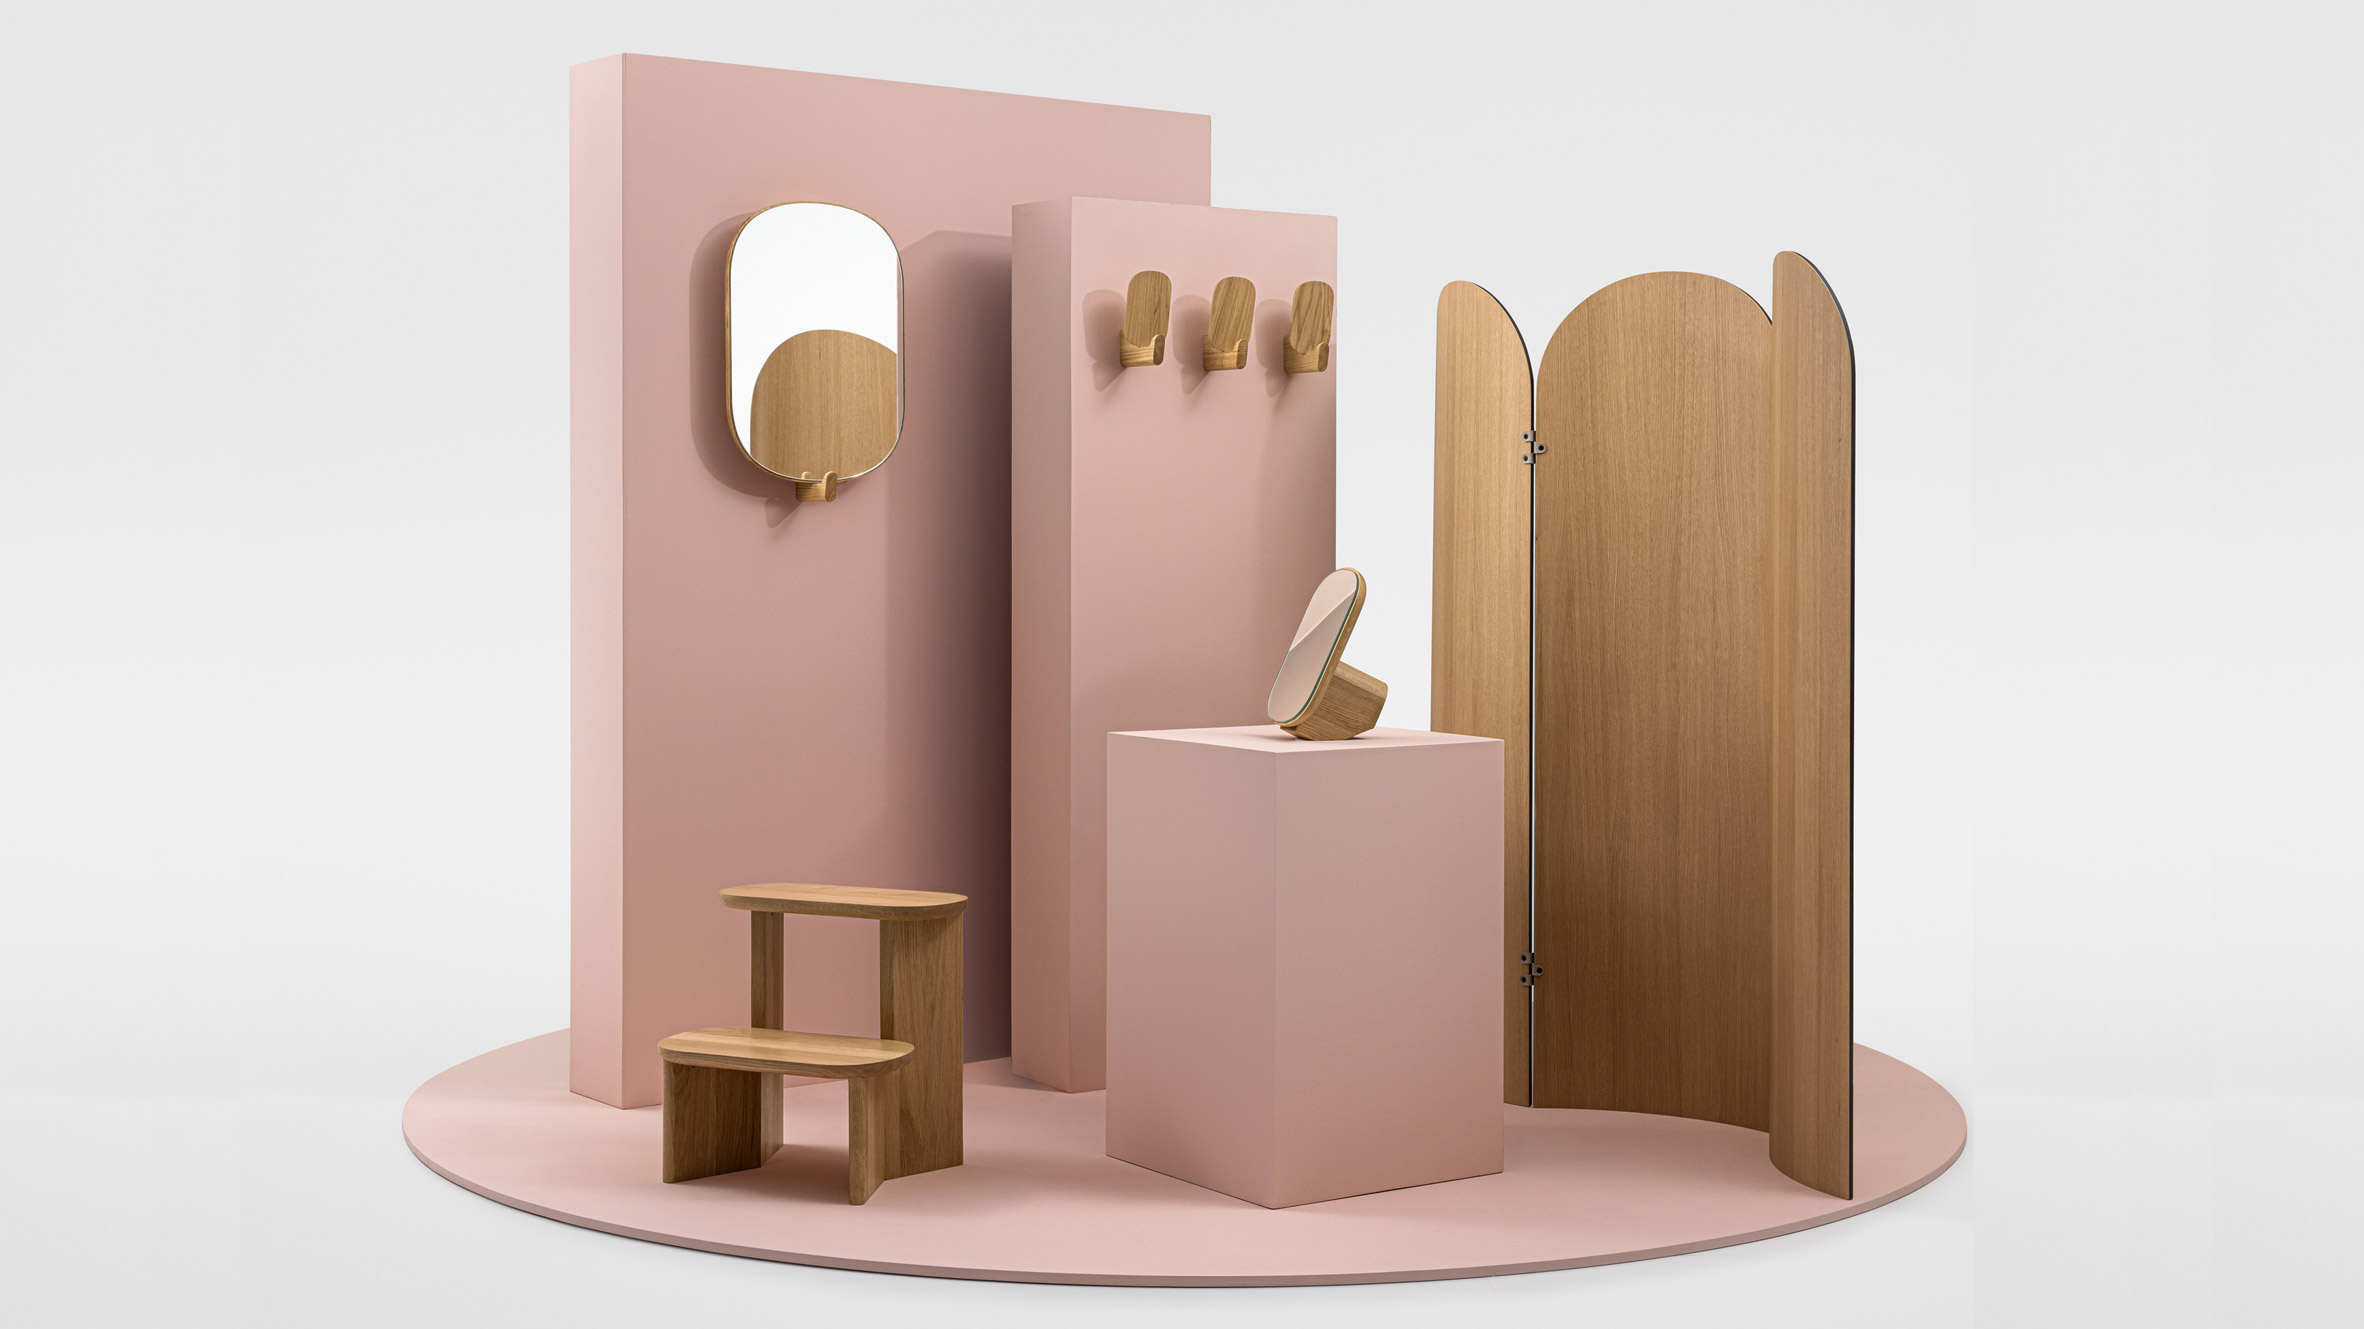 The Ad All collection by Zeitraum showcased on a pink stage